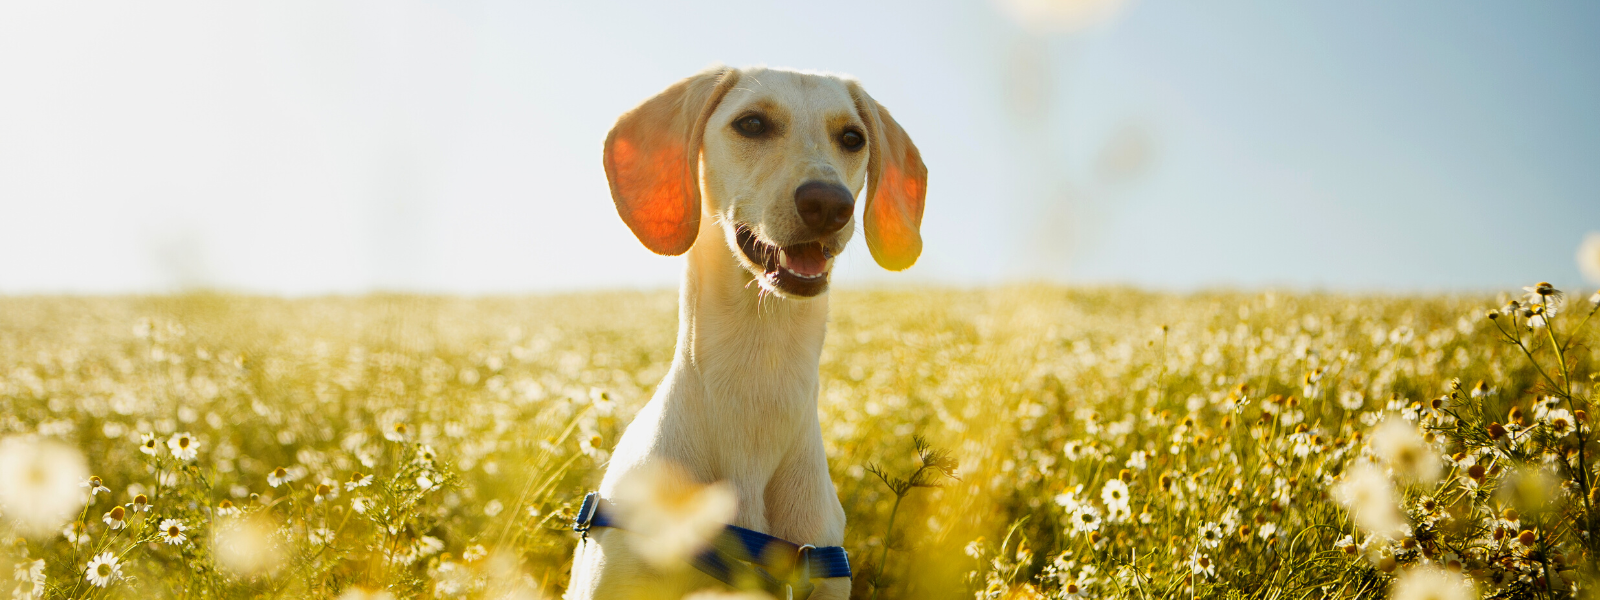 7 ways of being an eco-friendly dog owner